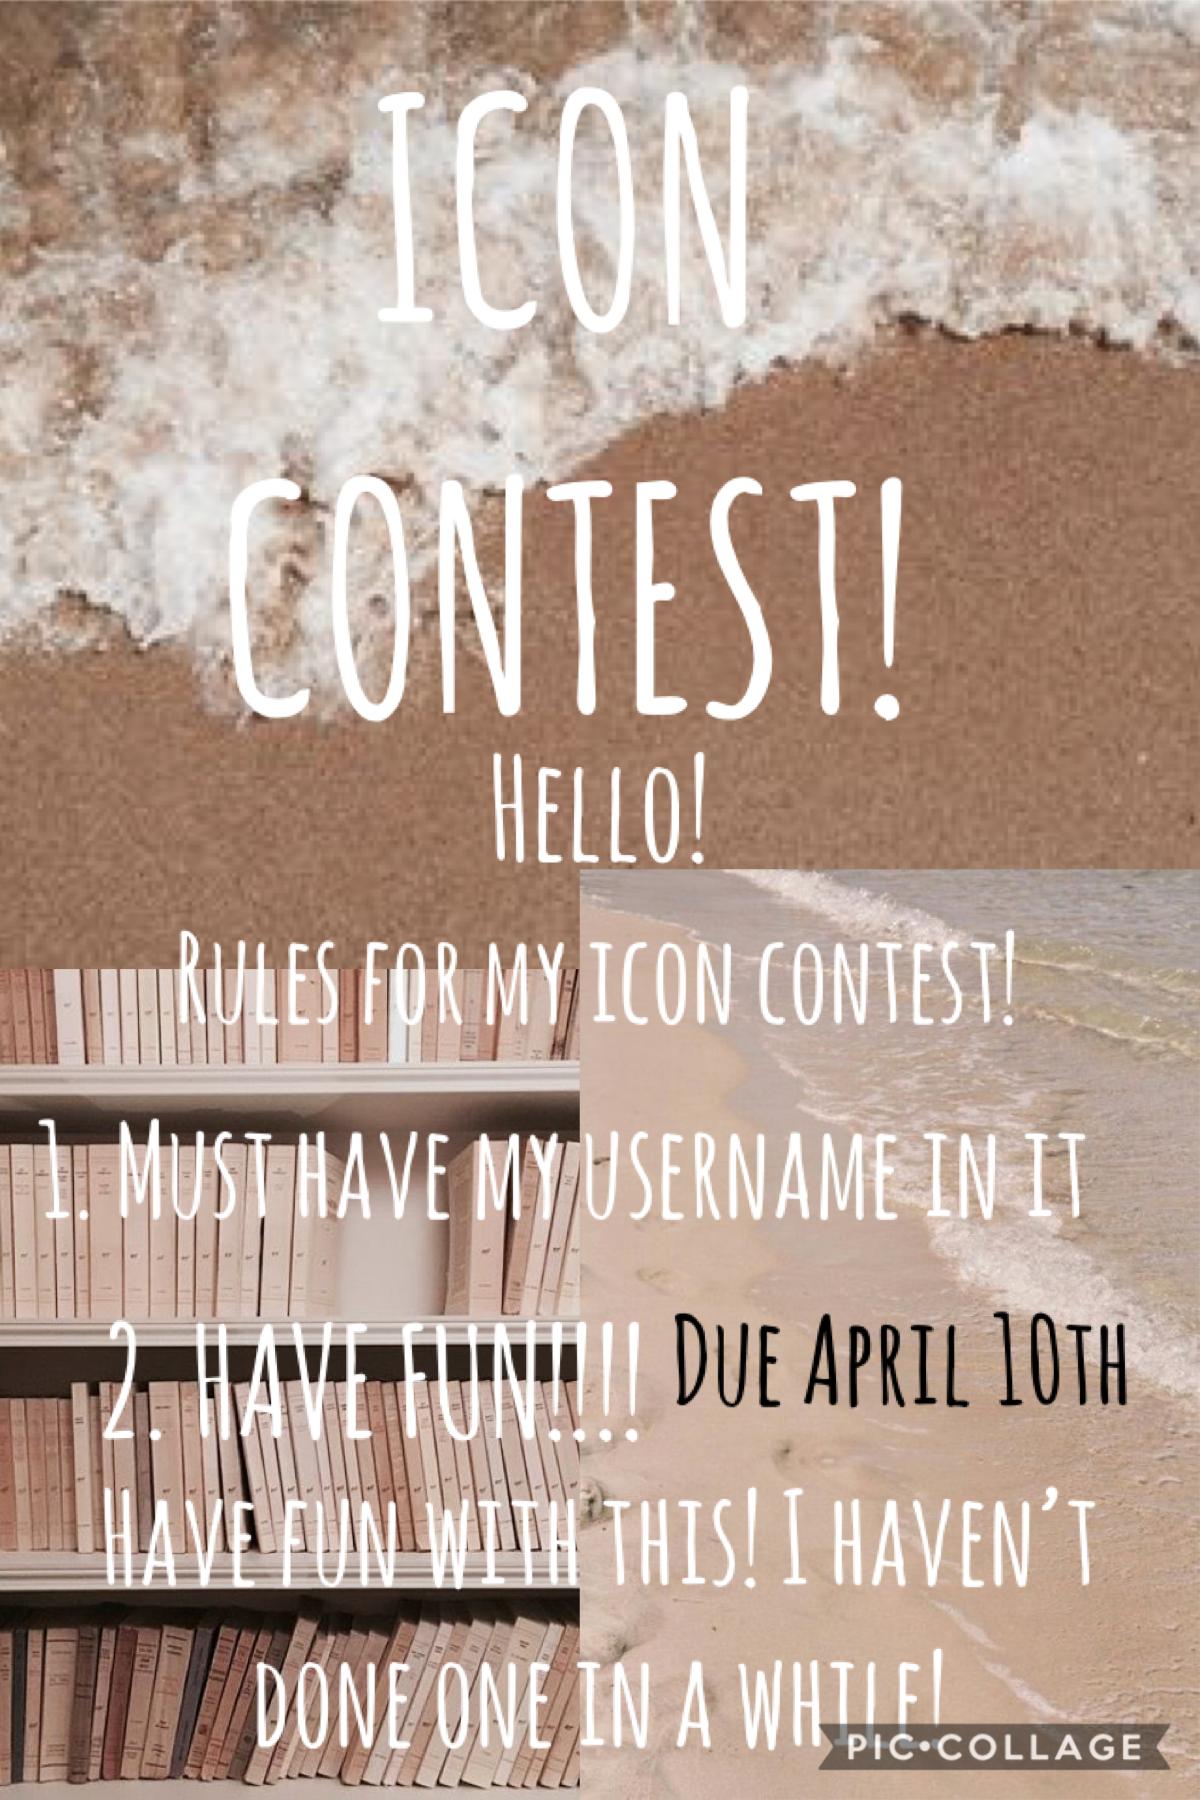 Icon contest!!
I haven’t done one in a while and if I did no one did it. lol but I’m trying again!! Okie so like it says It has to have my username in it and Have fun!!!! It’s also due APRIL 10TH idk if that’s too long, whoever creates the best icon for m